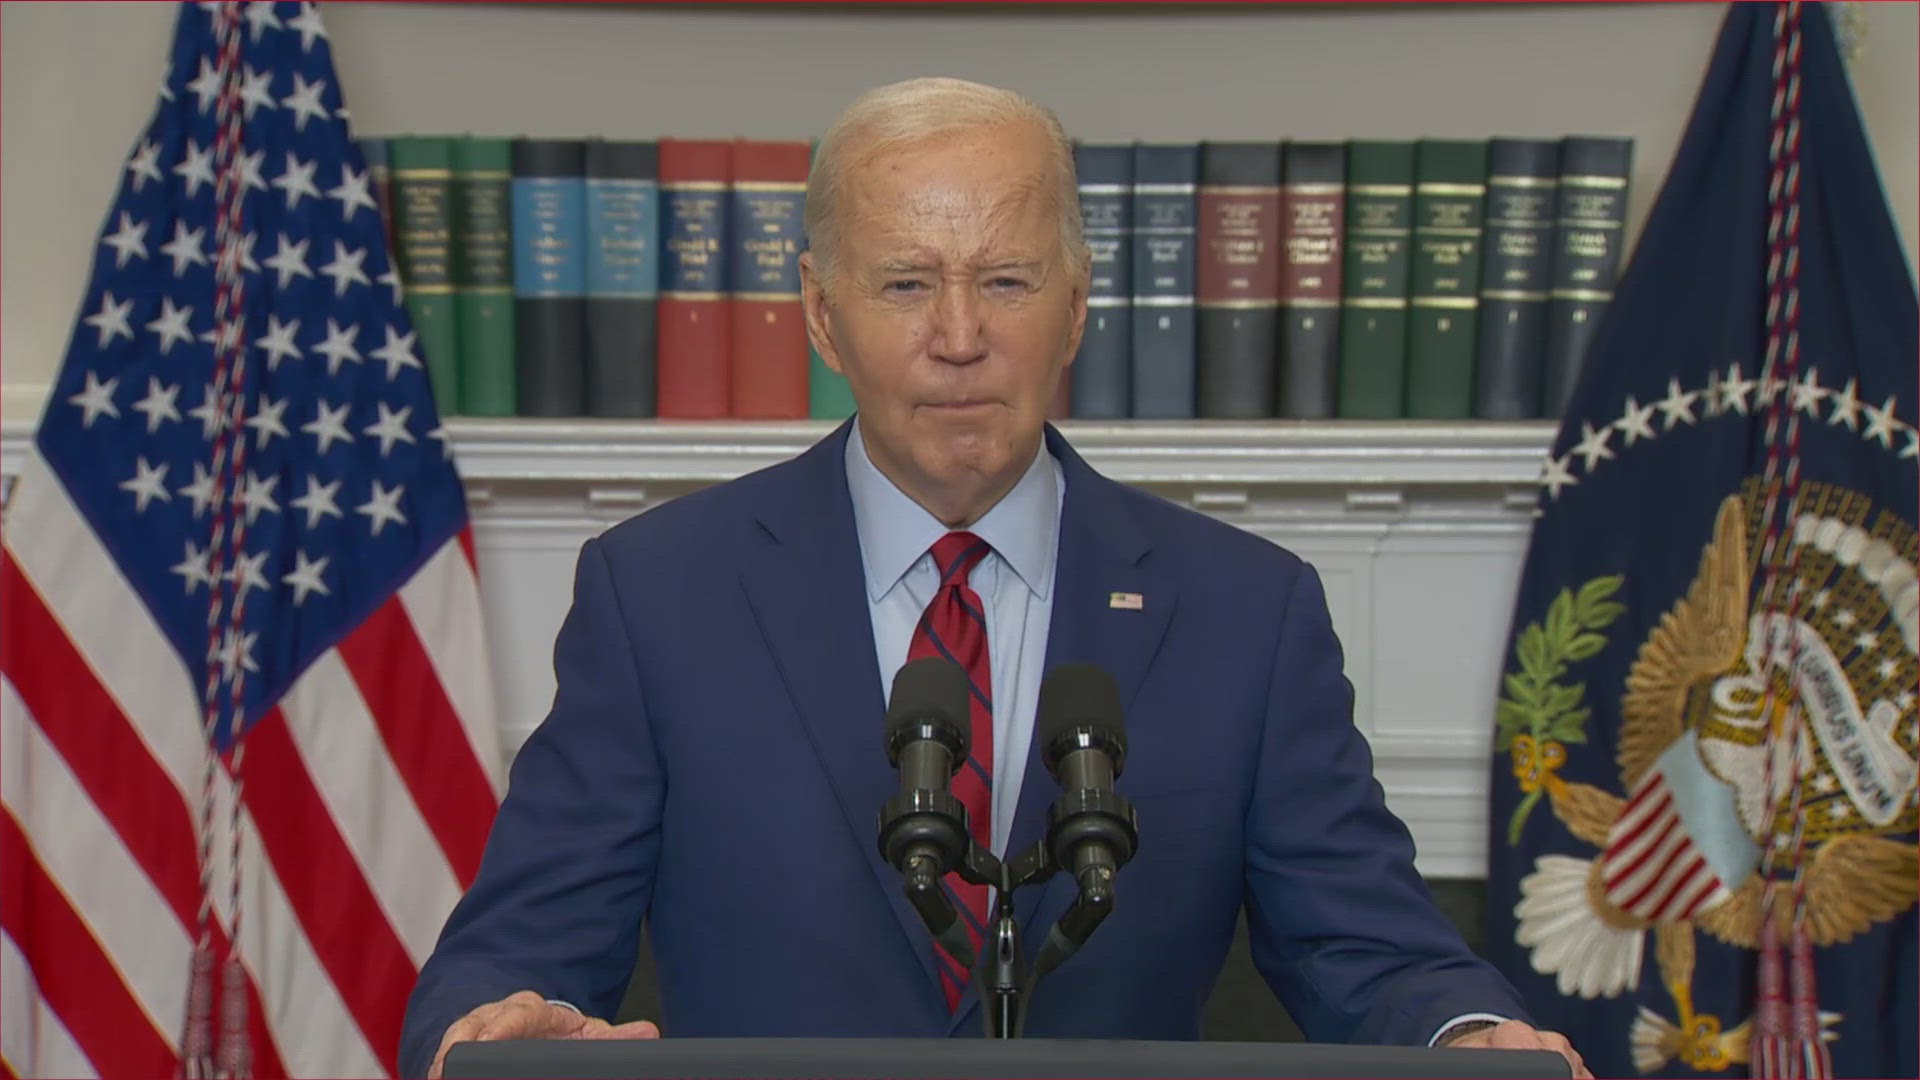 President Biden shares remarks on campus protests across the country